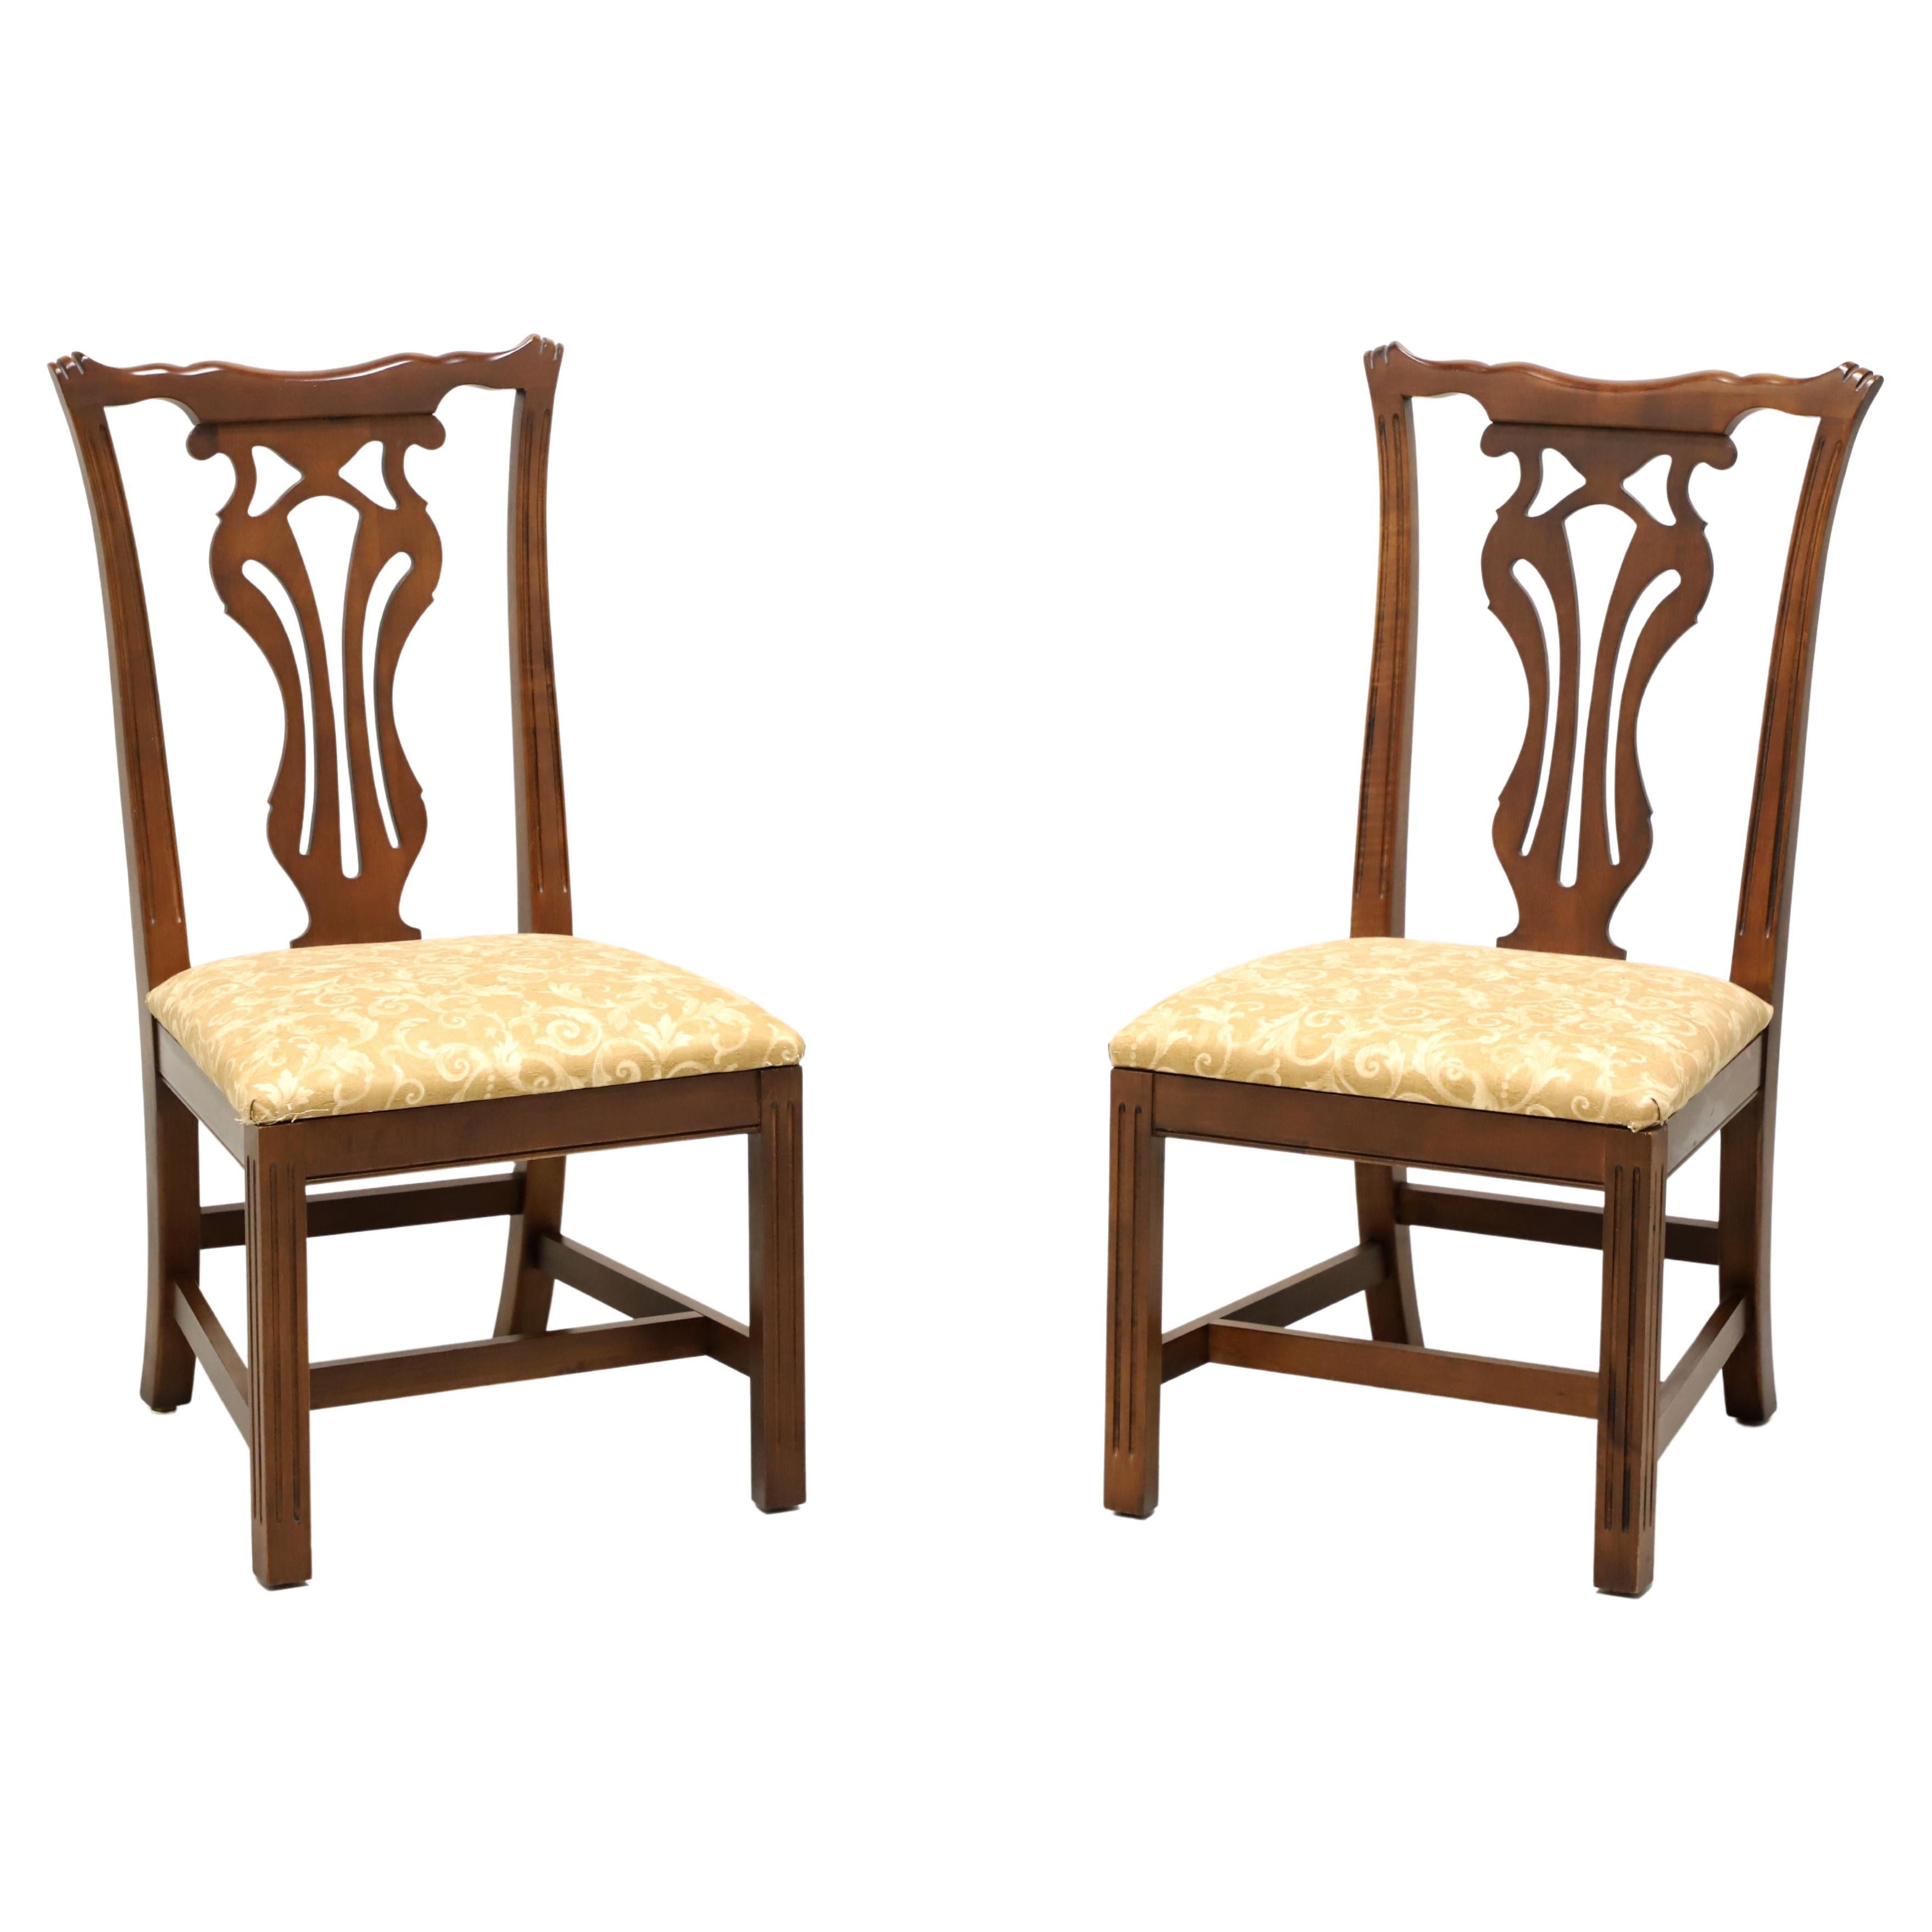 KNOB CREEK Mahogany Chippendale Dining Side Chairs - Pair C For Sale